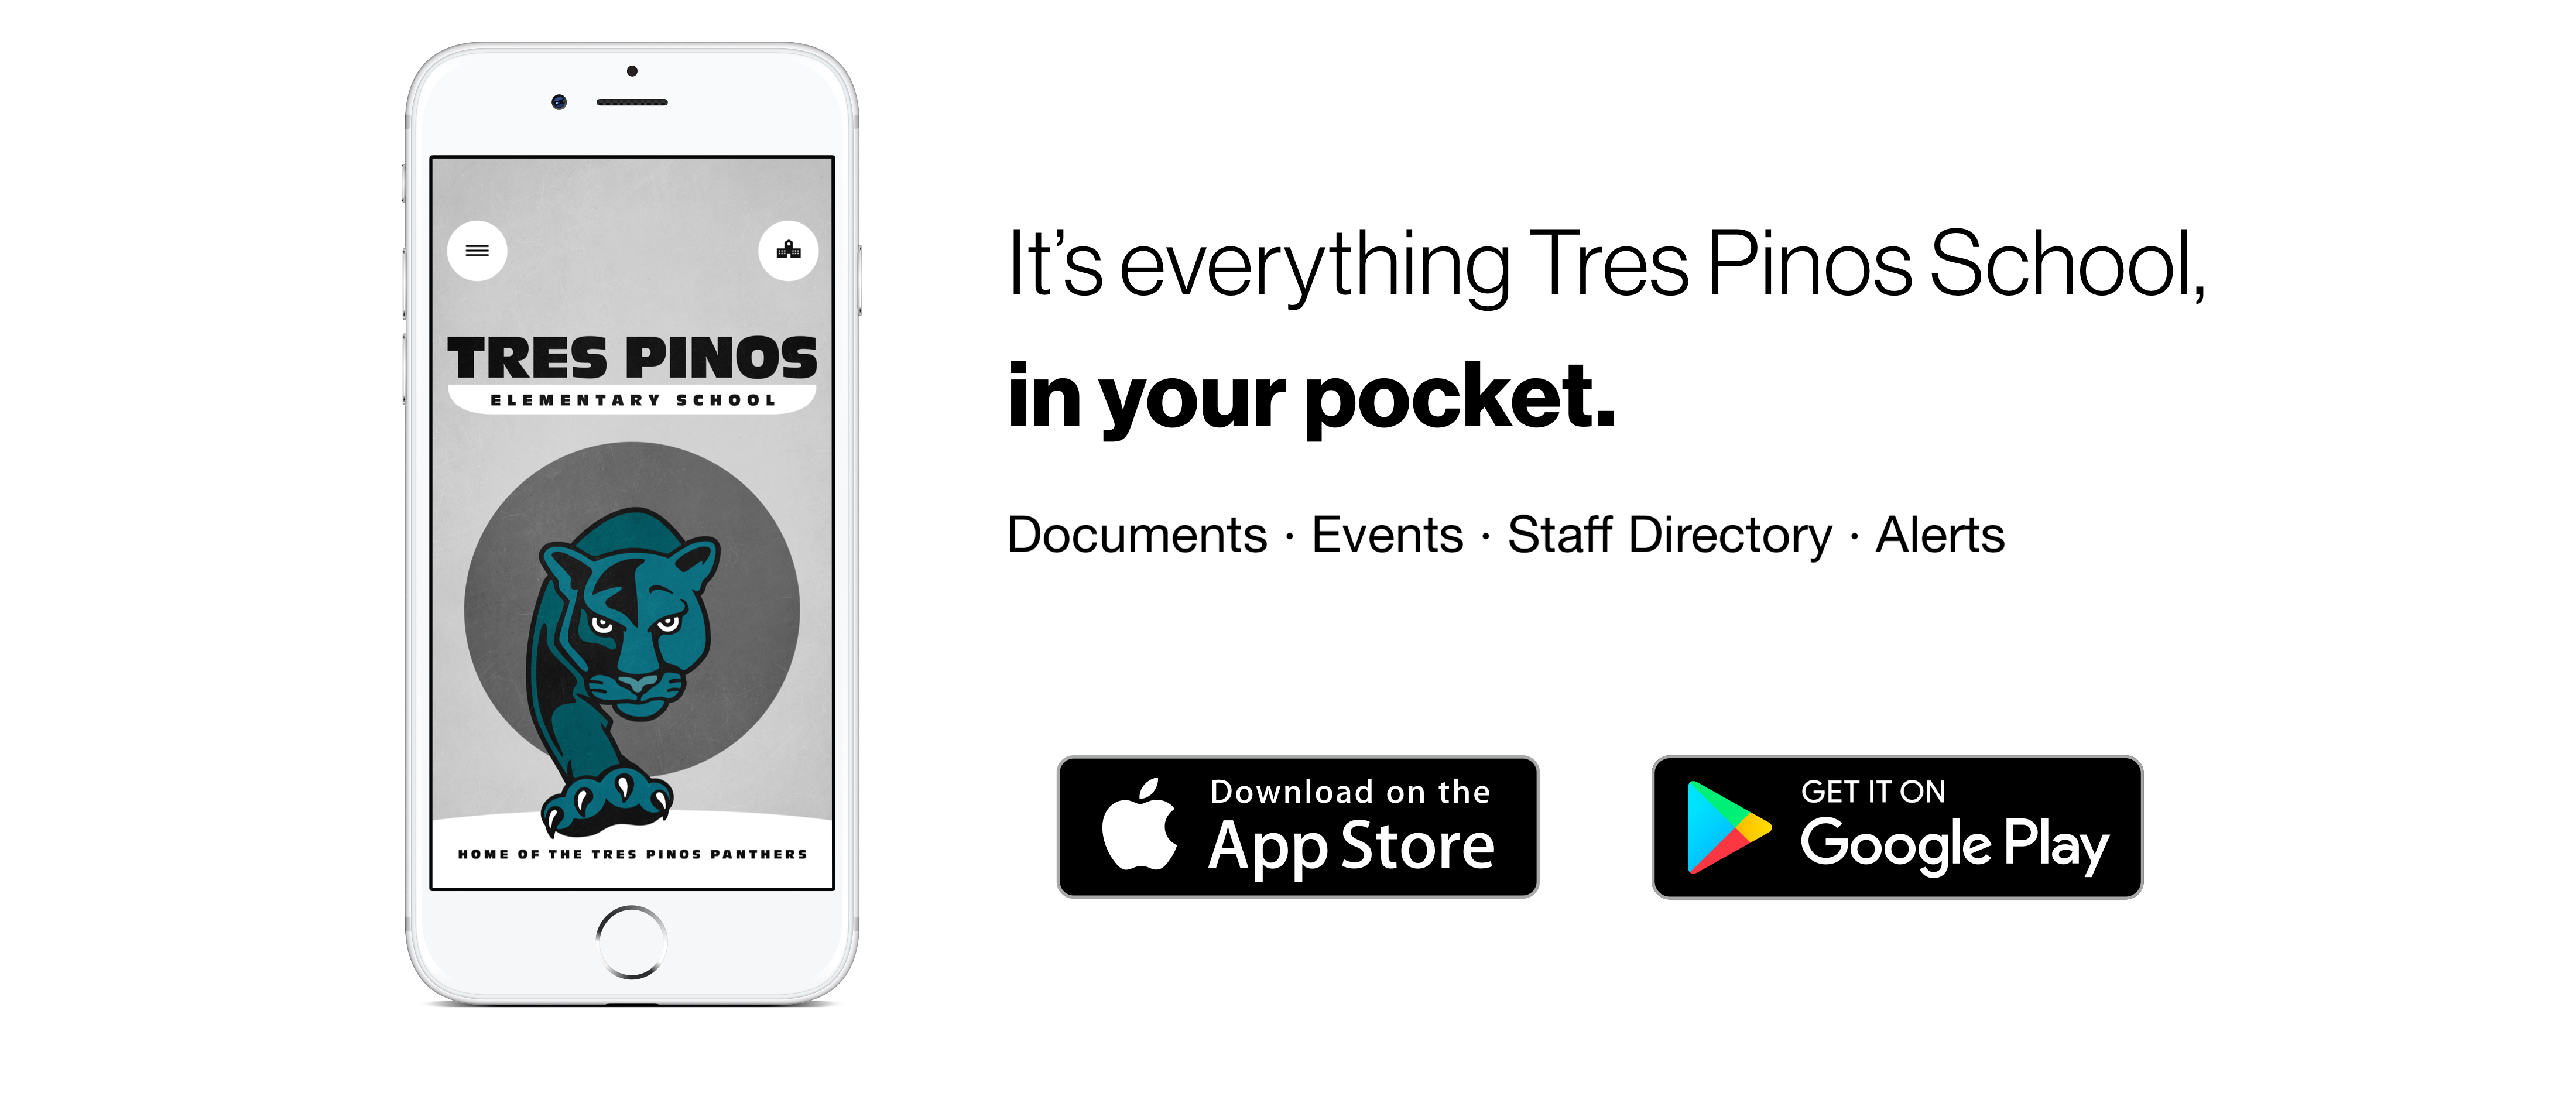 Download the new app! It's everything Tres Pinos! in your pocket!